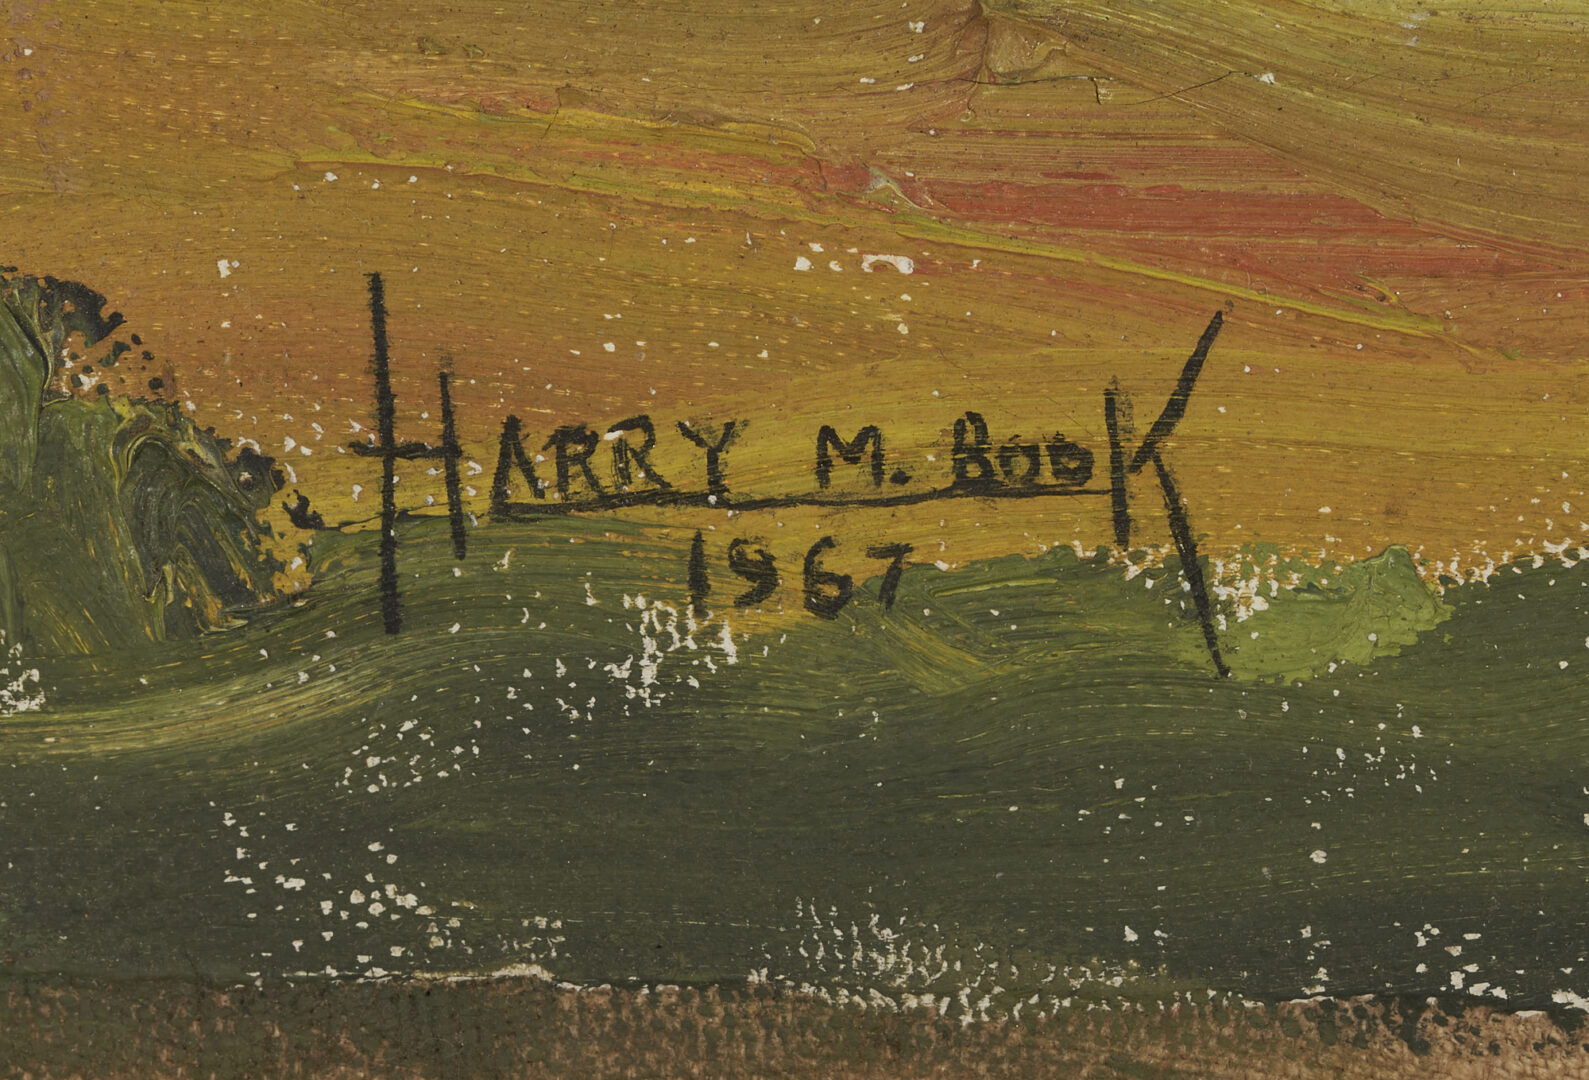 Lot 29: Harry Martin Book O/C Landscape Painting